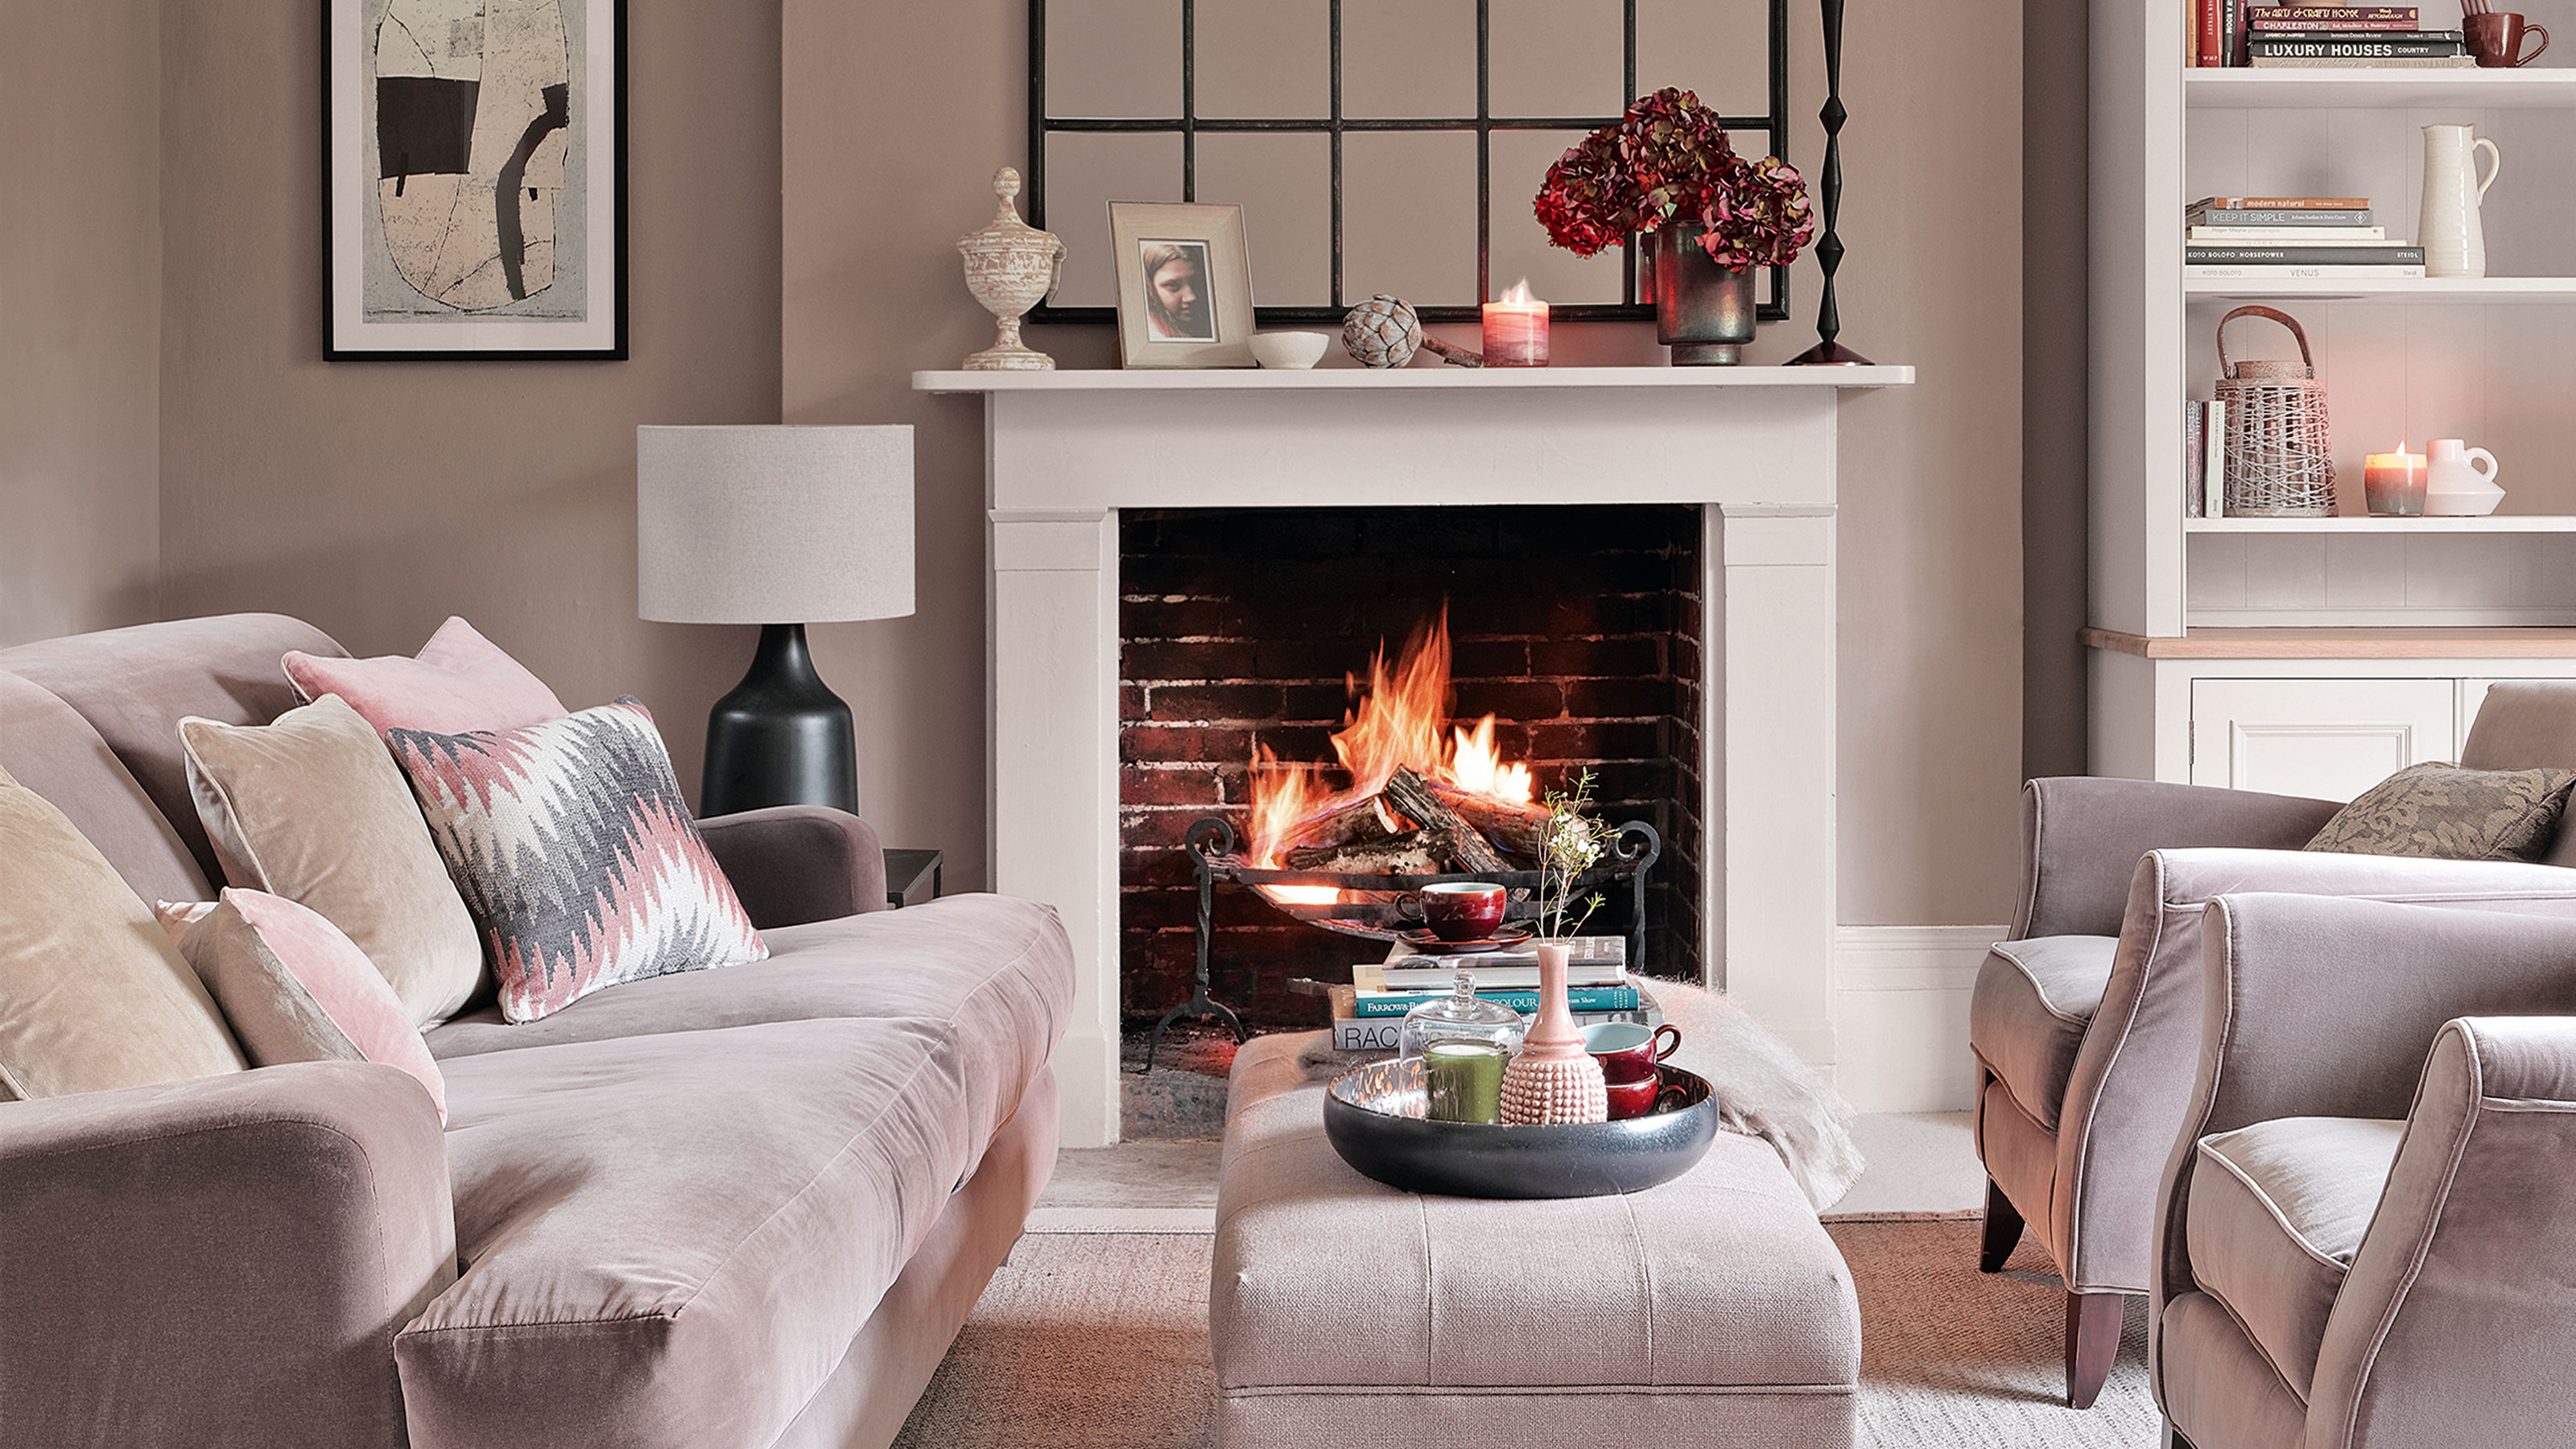 How do I make my living room cozy with lighting 7 top tips from interior designers